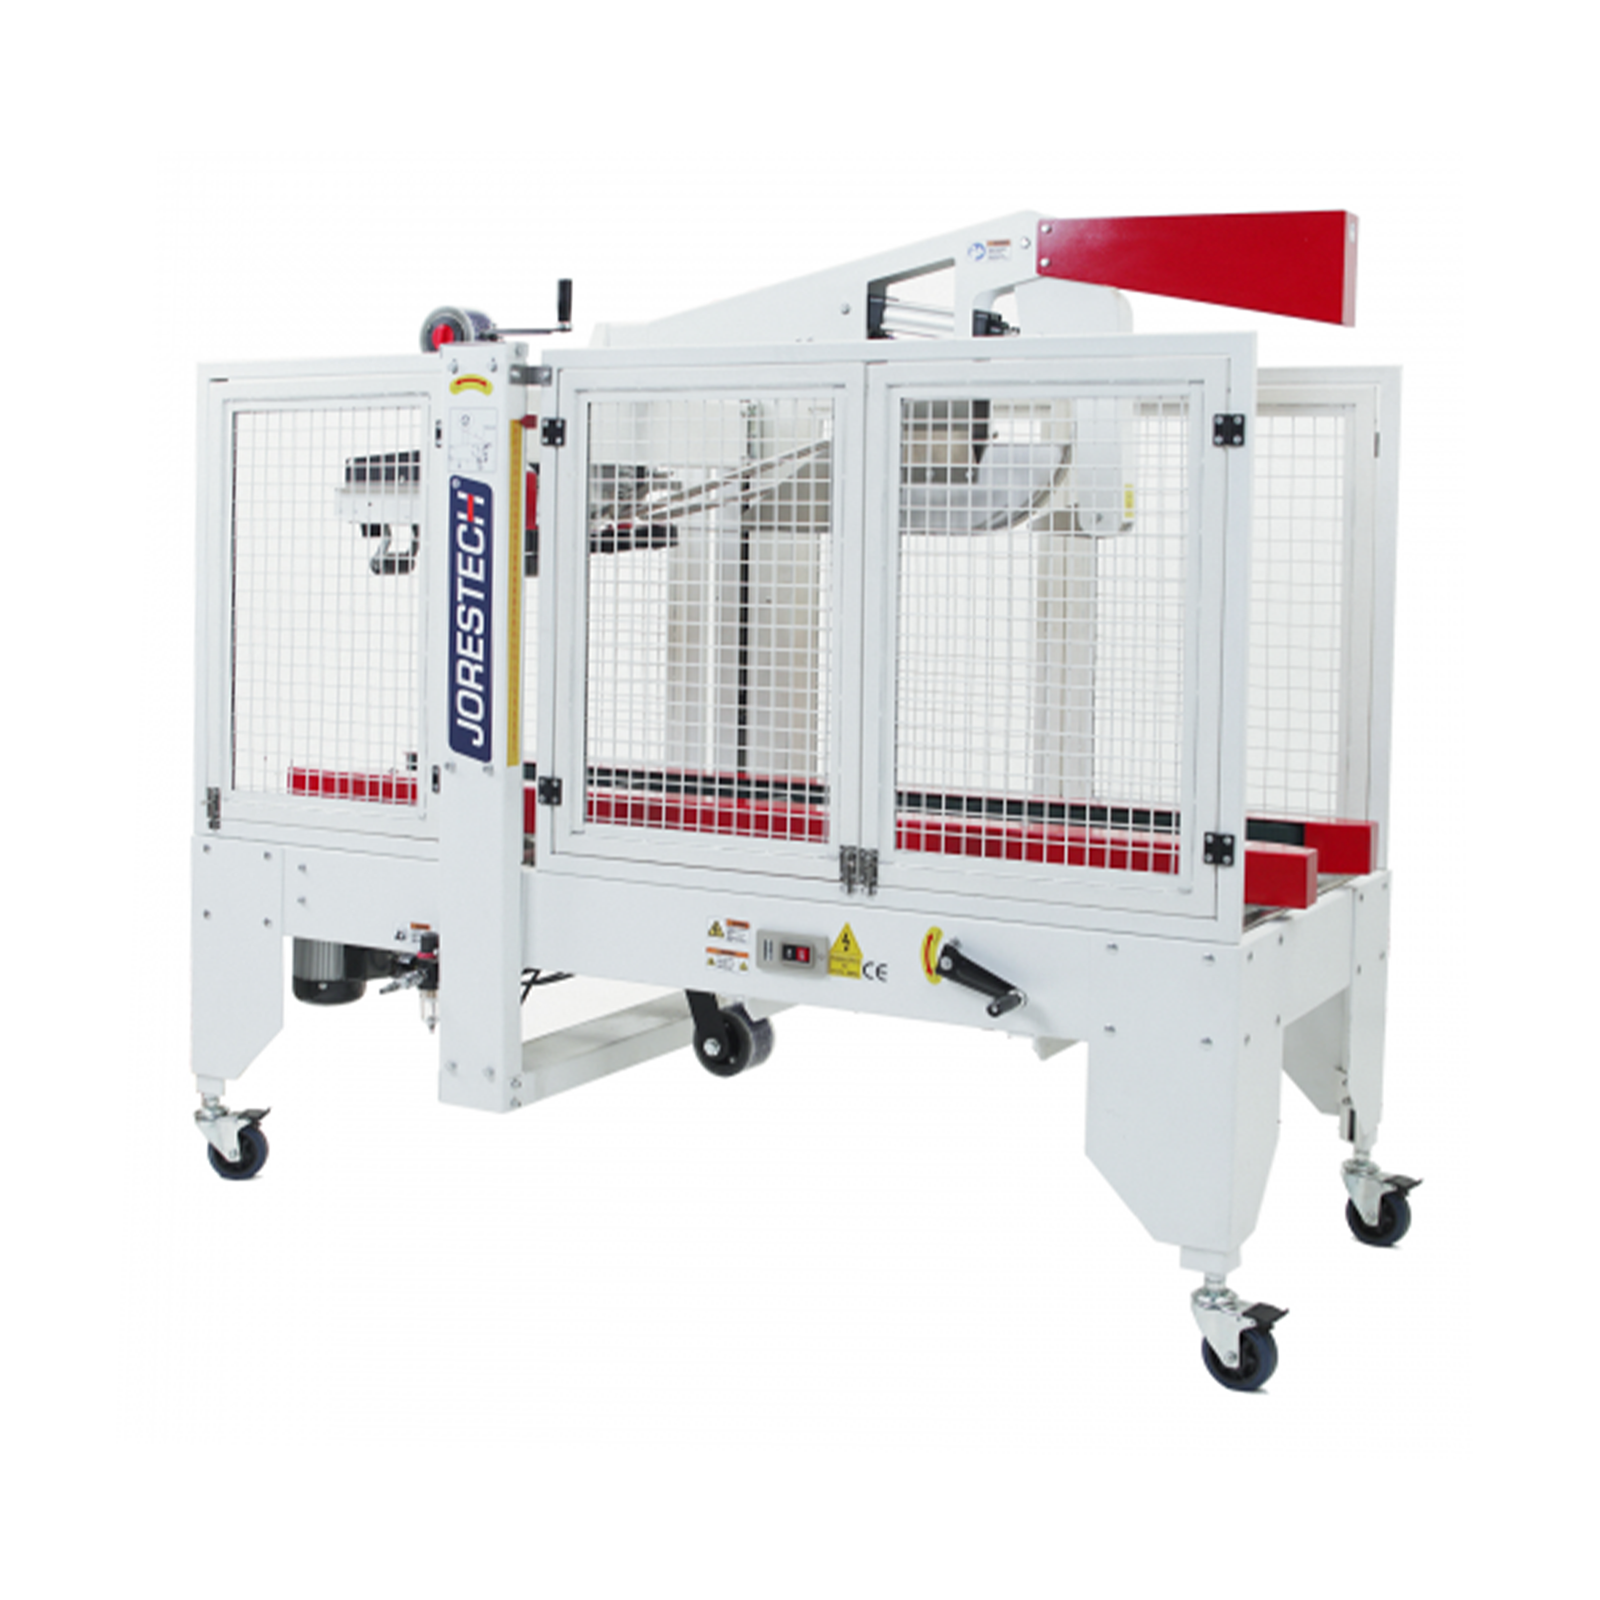 Semi-automatic case sealer machine with red side traction bars by JORES TECHNOLOGIES® 